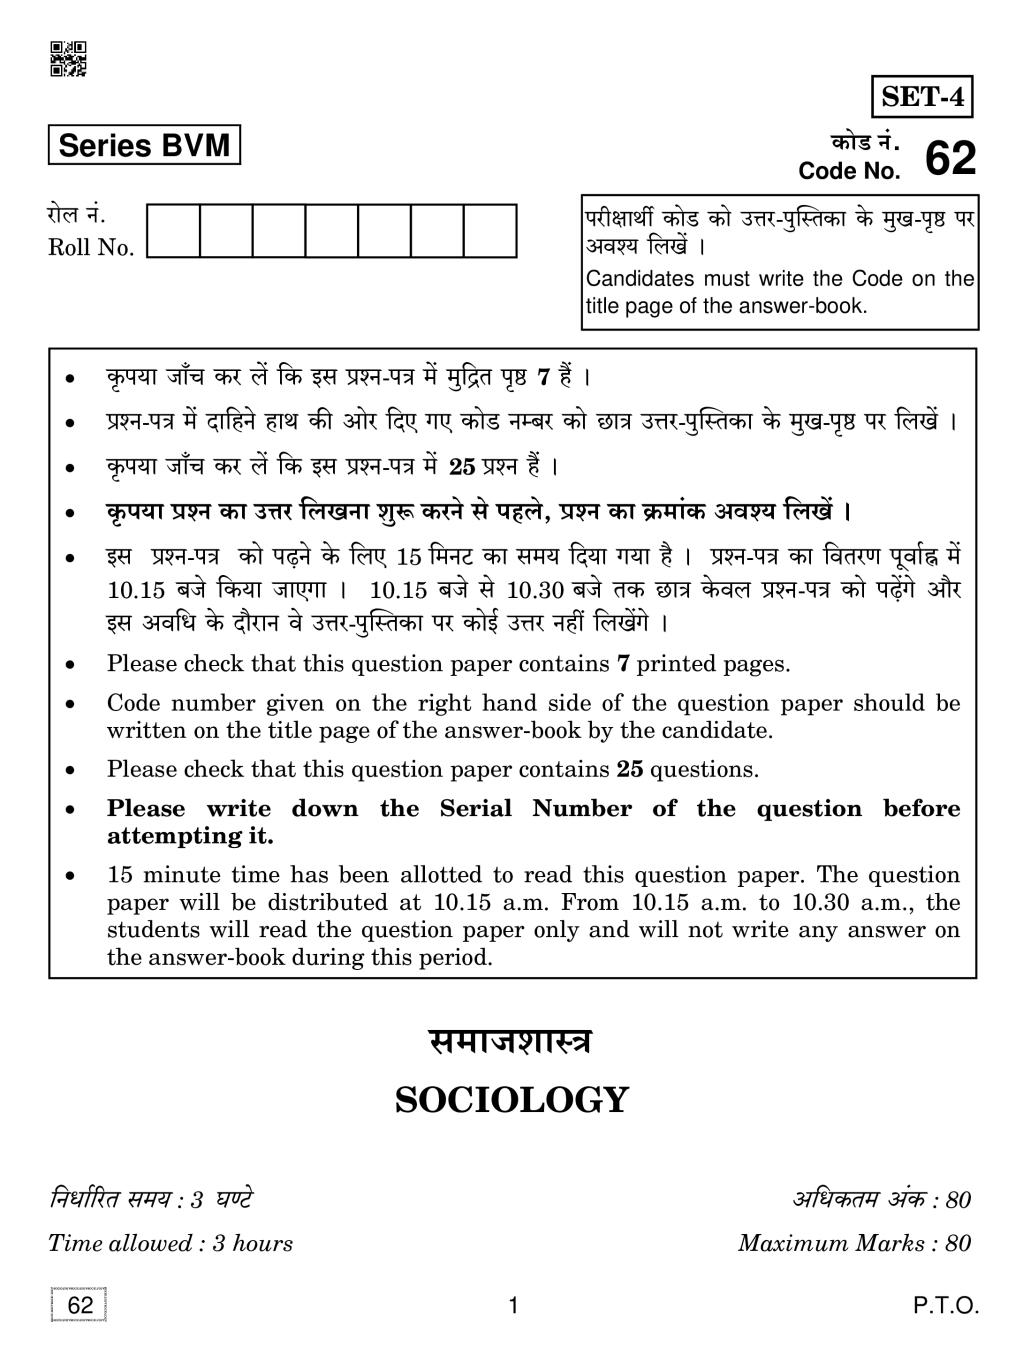 CBSE Class 12 Sociology Question Paper 2019 Set 1 - Page 1